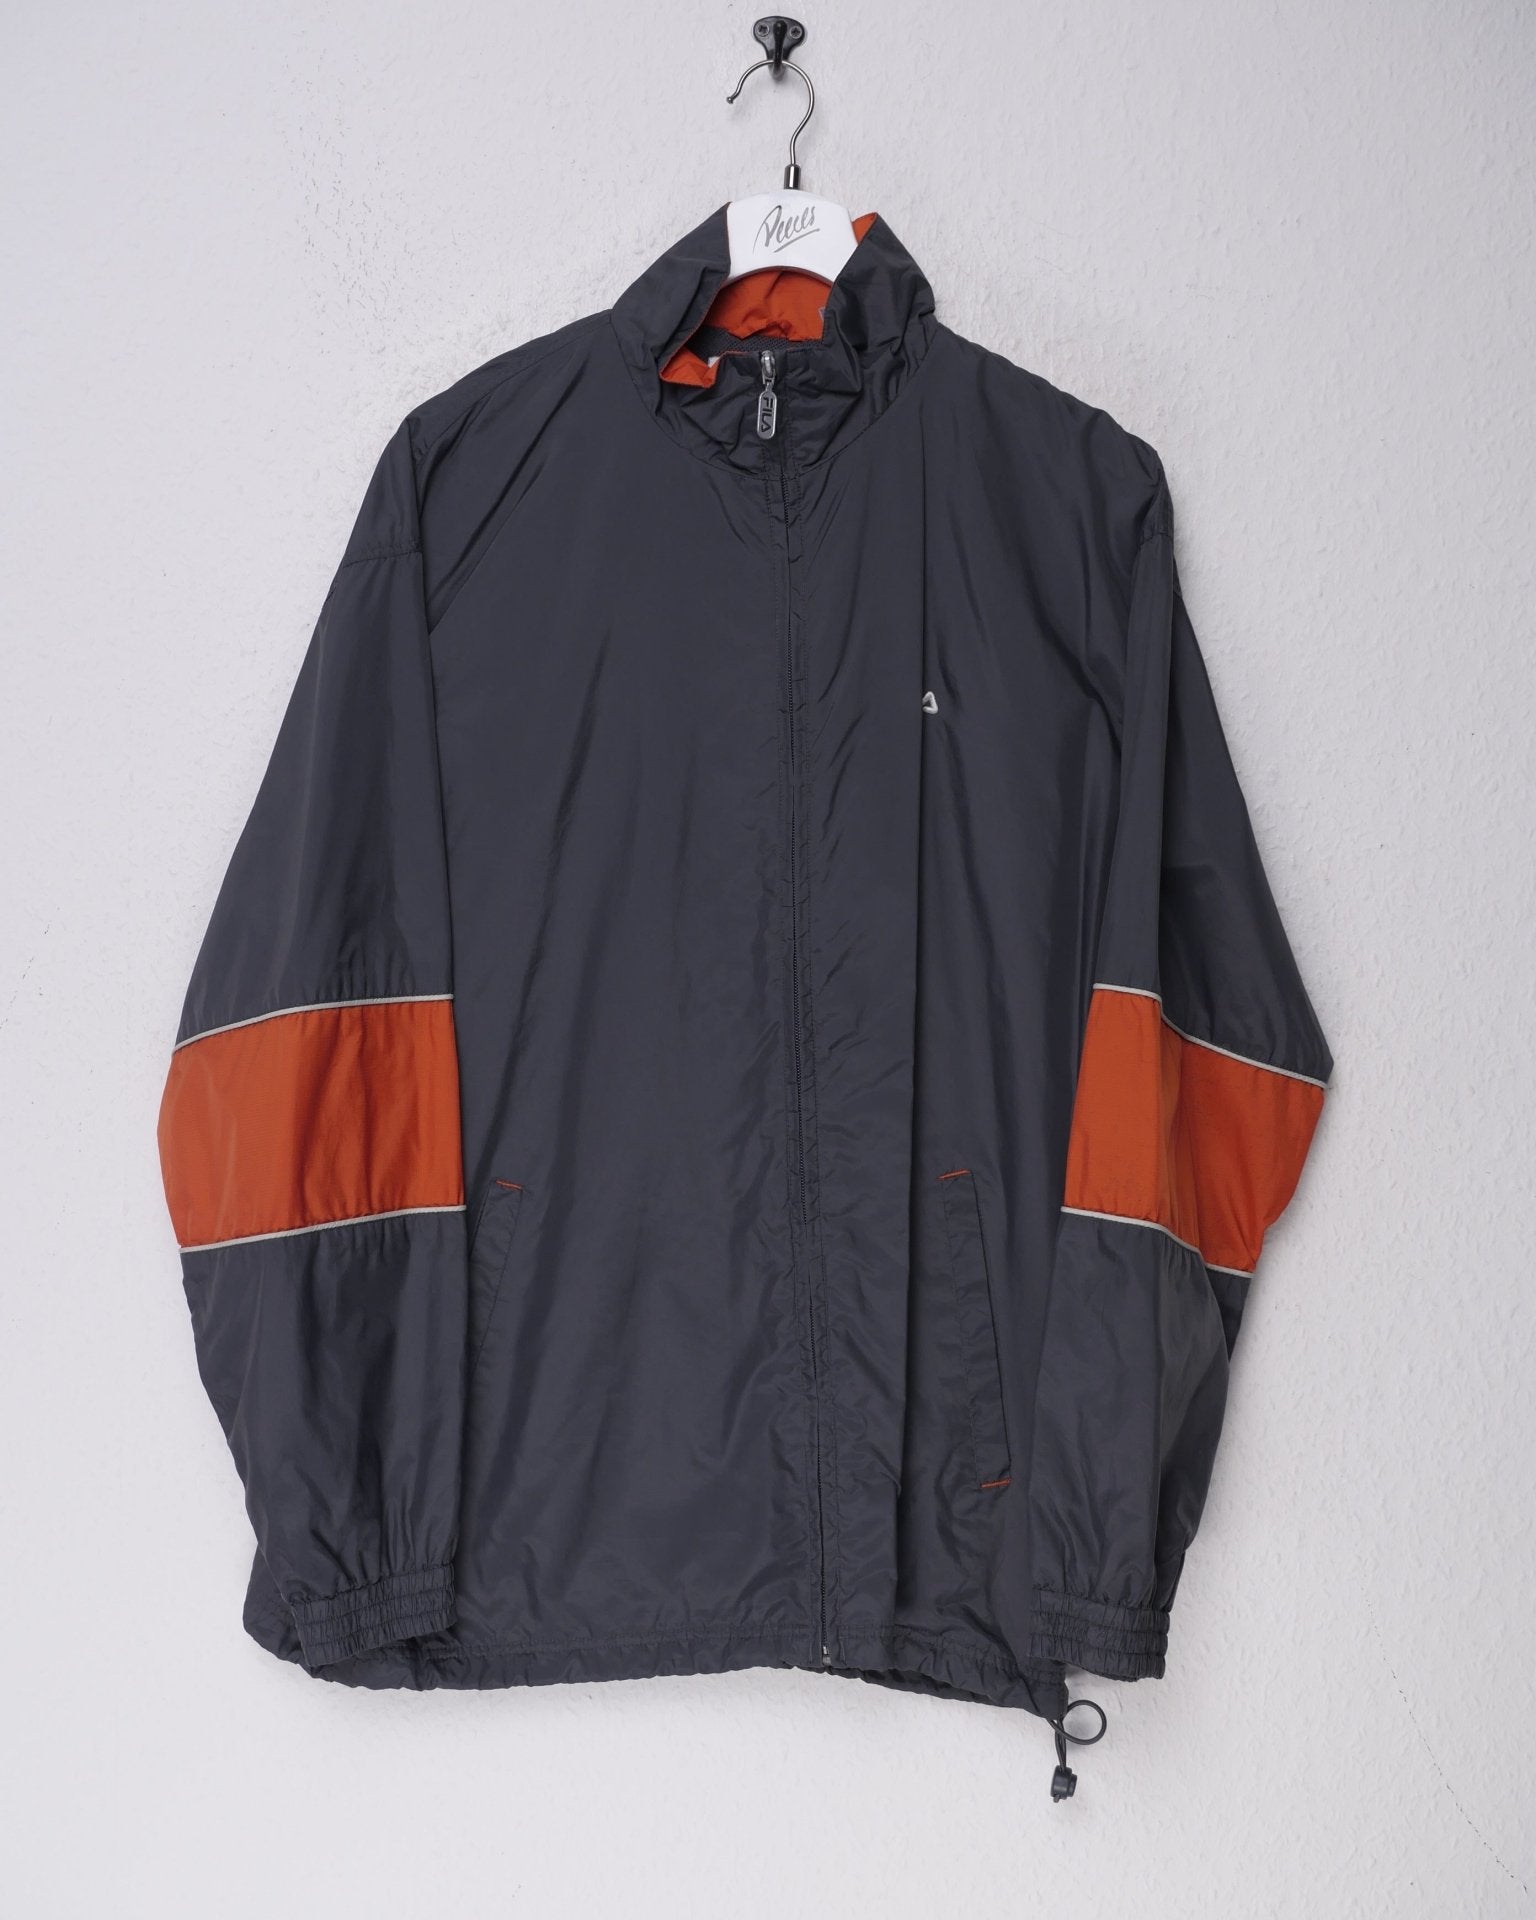 Fila embroidered Spellout two toned Track Jacket - Peeces